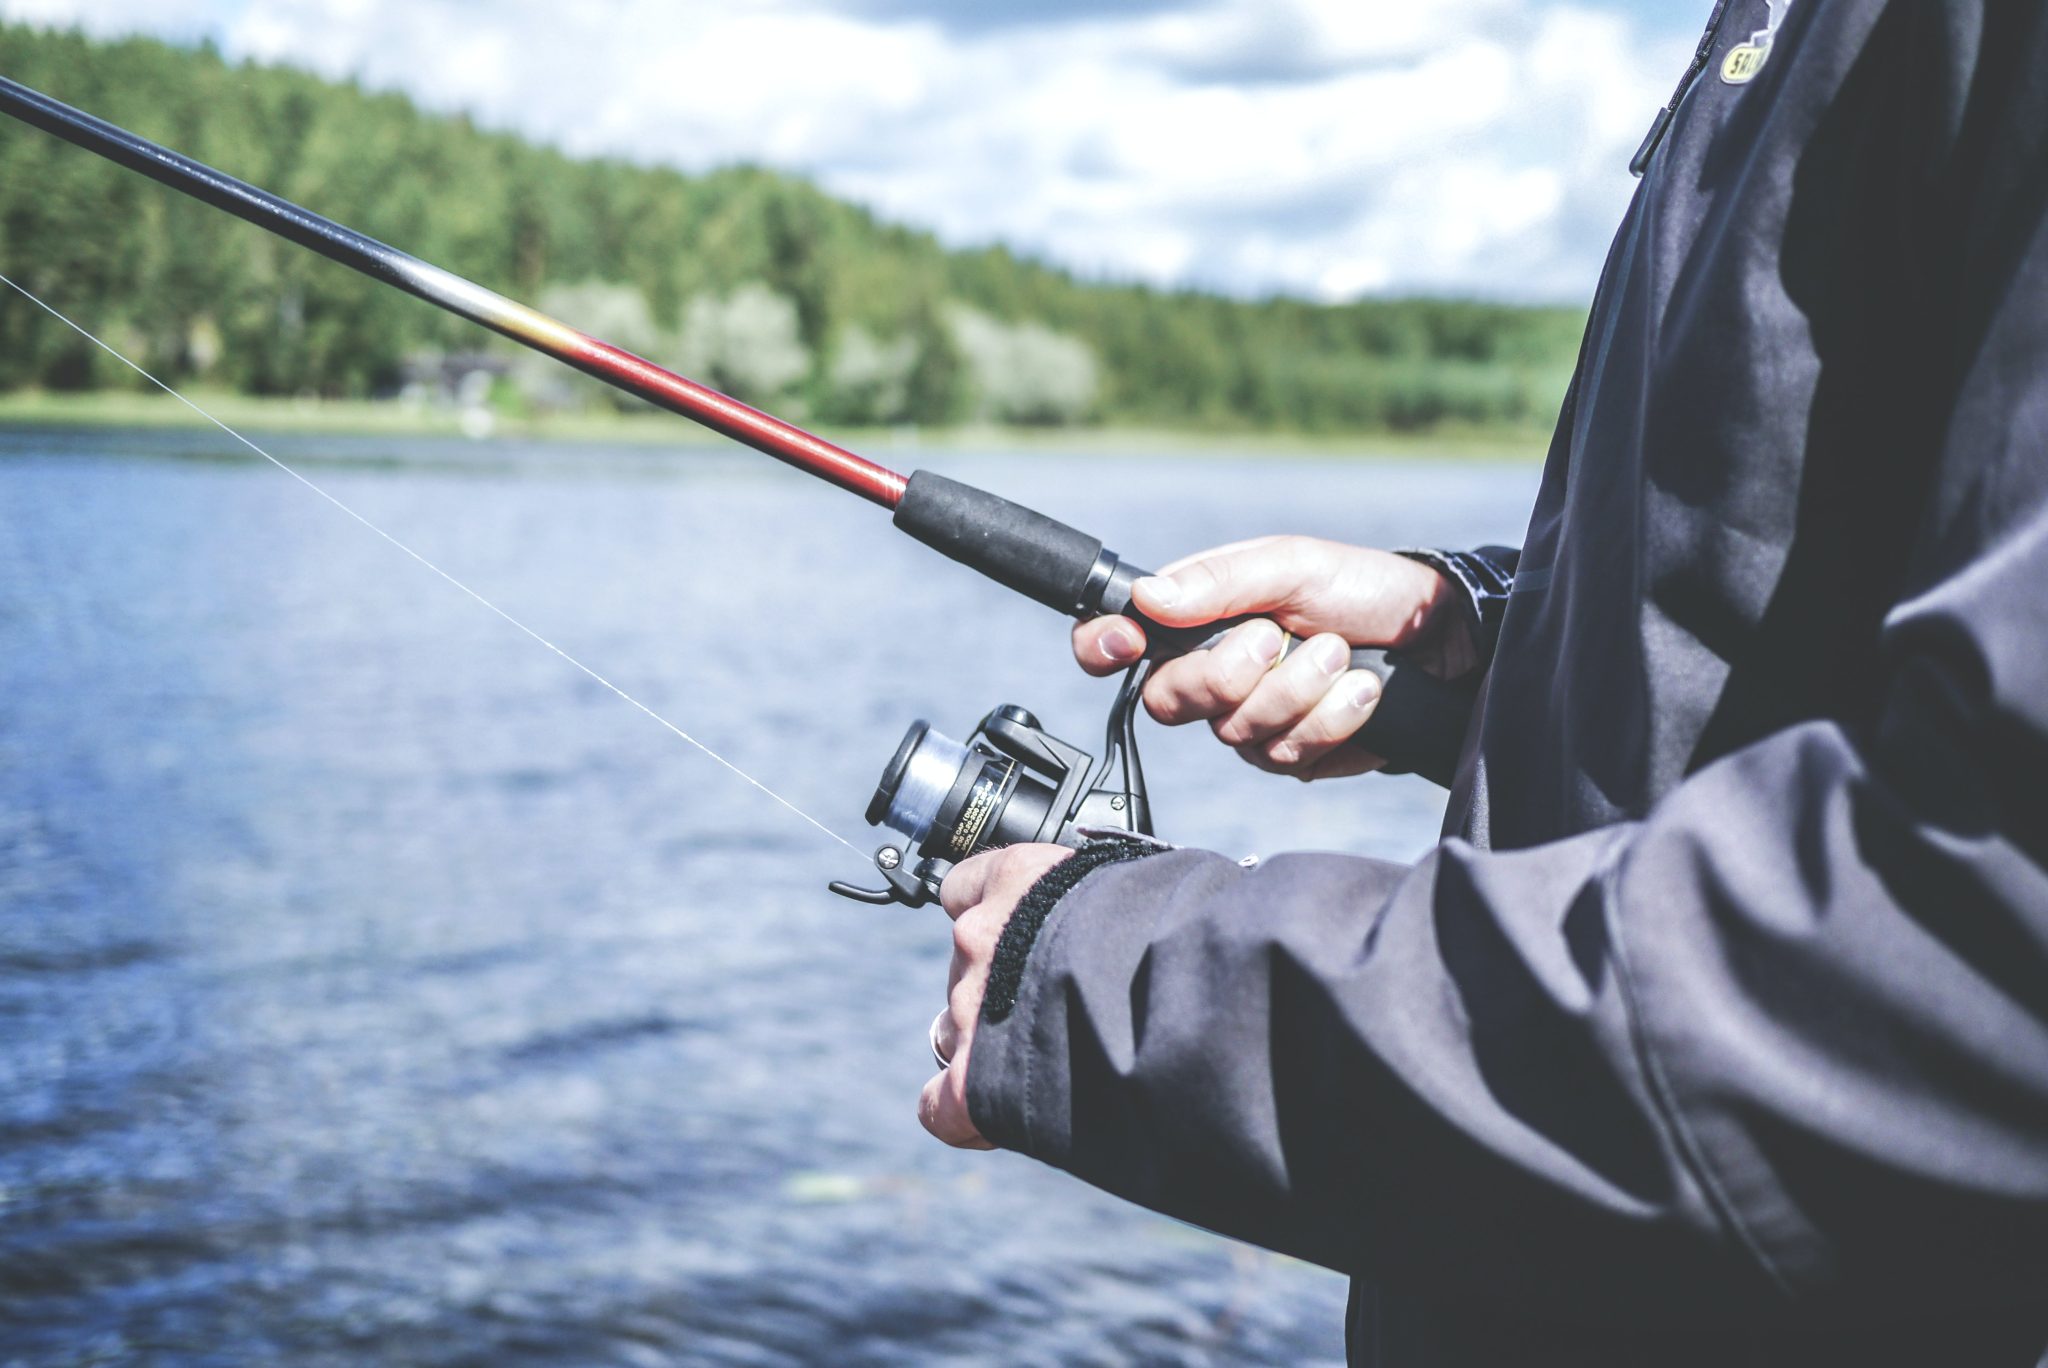 New 2023 Fishing Regulations Now Available 92.1 WLHR